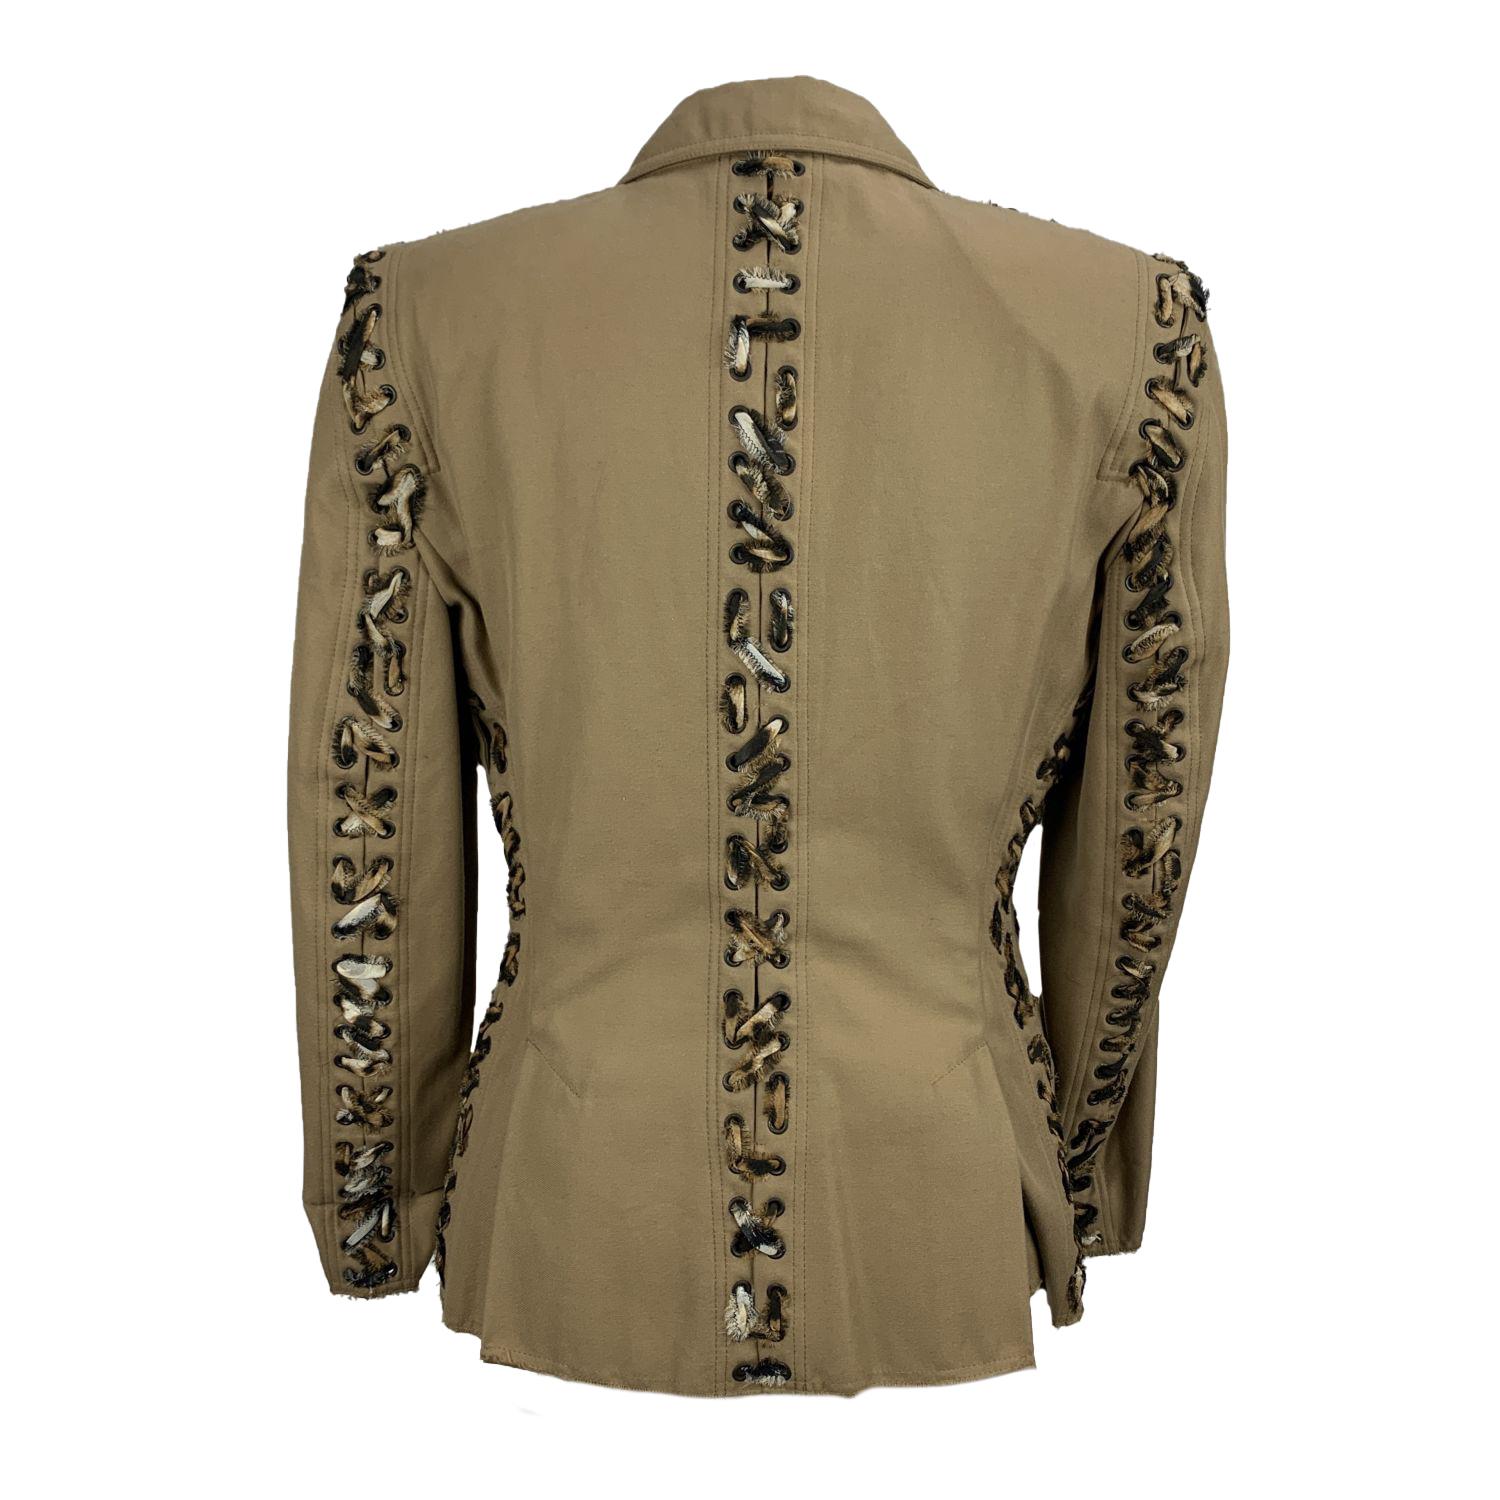 Yves Saint Laurent fitted blazer. Composition: 100% Cotton. Color: Beige. Long sleeves. Notch lapel collar. Hits around hips. Animal print lace up detail. Front welt pockets. Padded shoulders. Front hook-and-eye closure. Unlined. Size: 36 FR (The